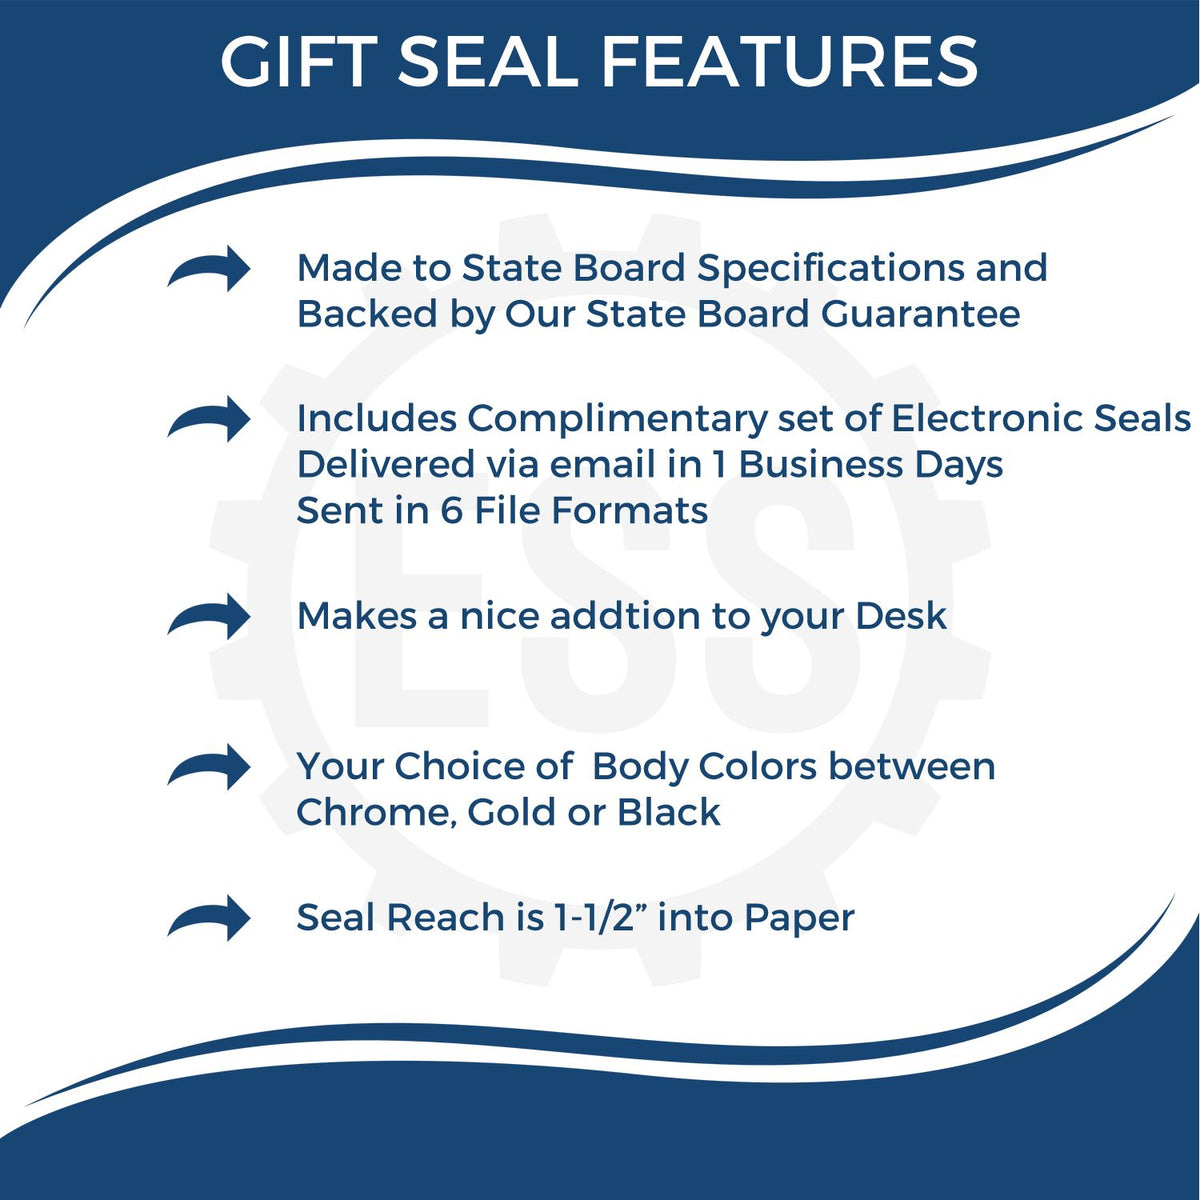 A picture of an infographic highlighting the selling points for the Gift Idaho Architect Seal